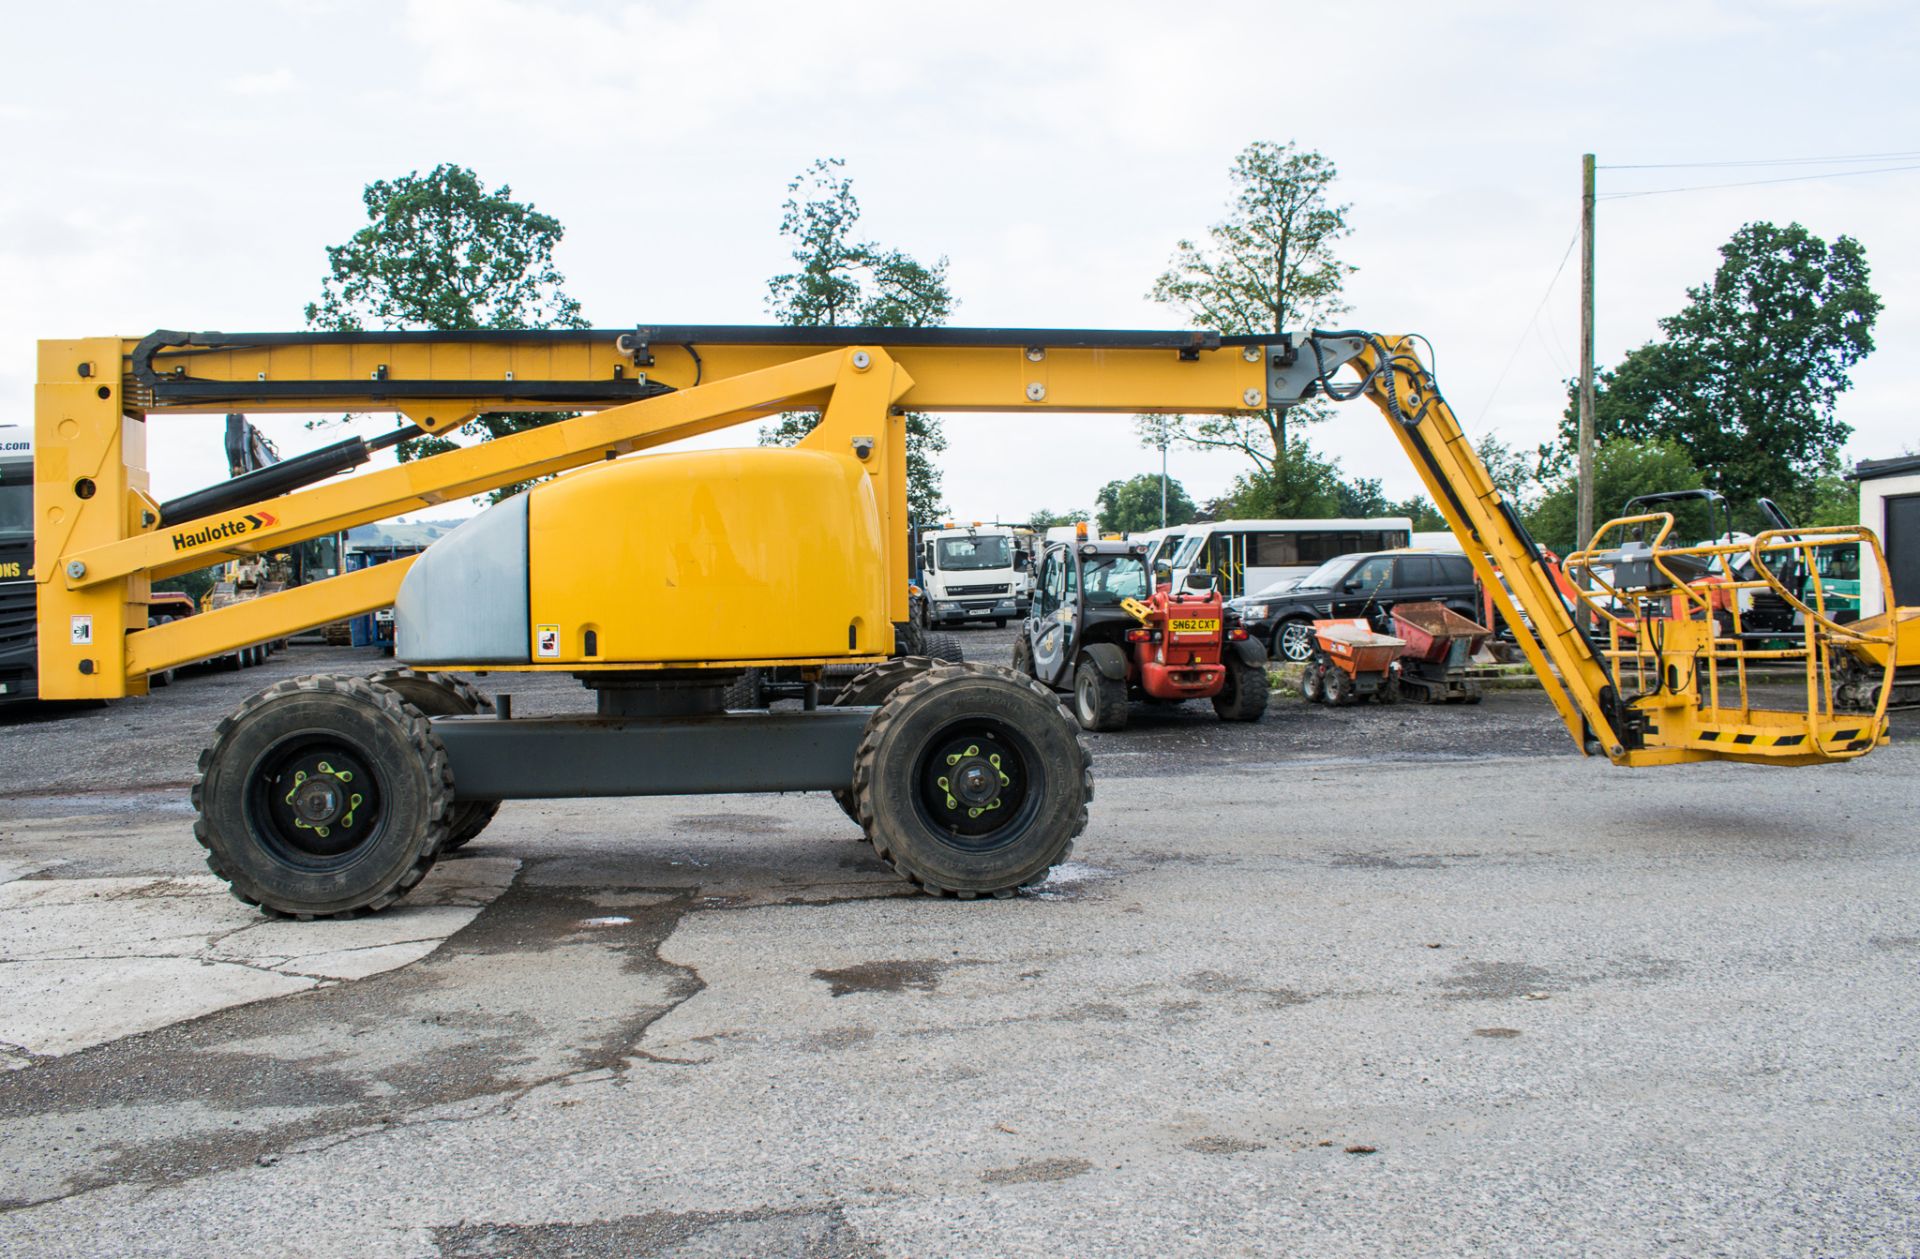 HAULOTTE HA20PX diesel driven articulated boom lift access platform Year: 2012 S/N: AD400588 - Image 9 of 14